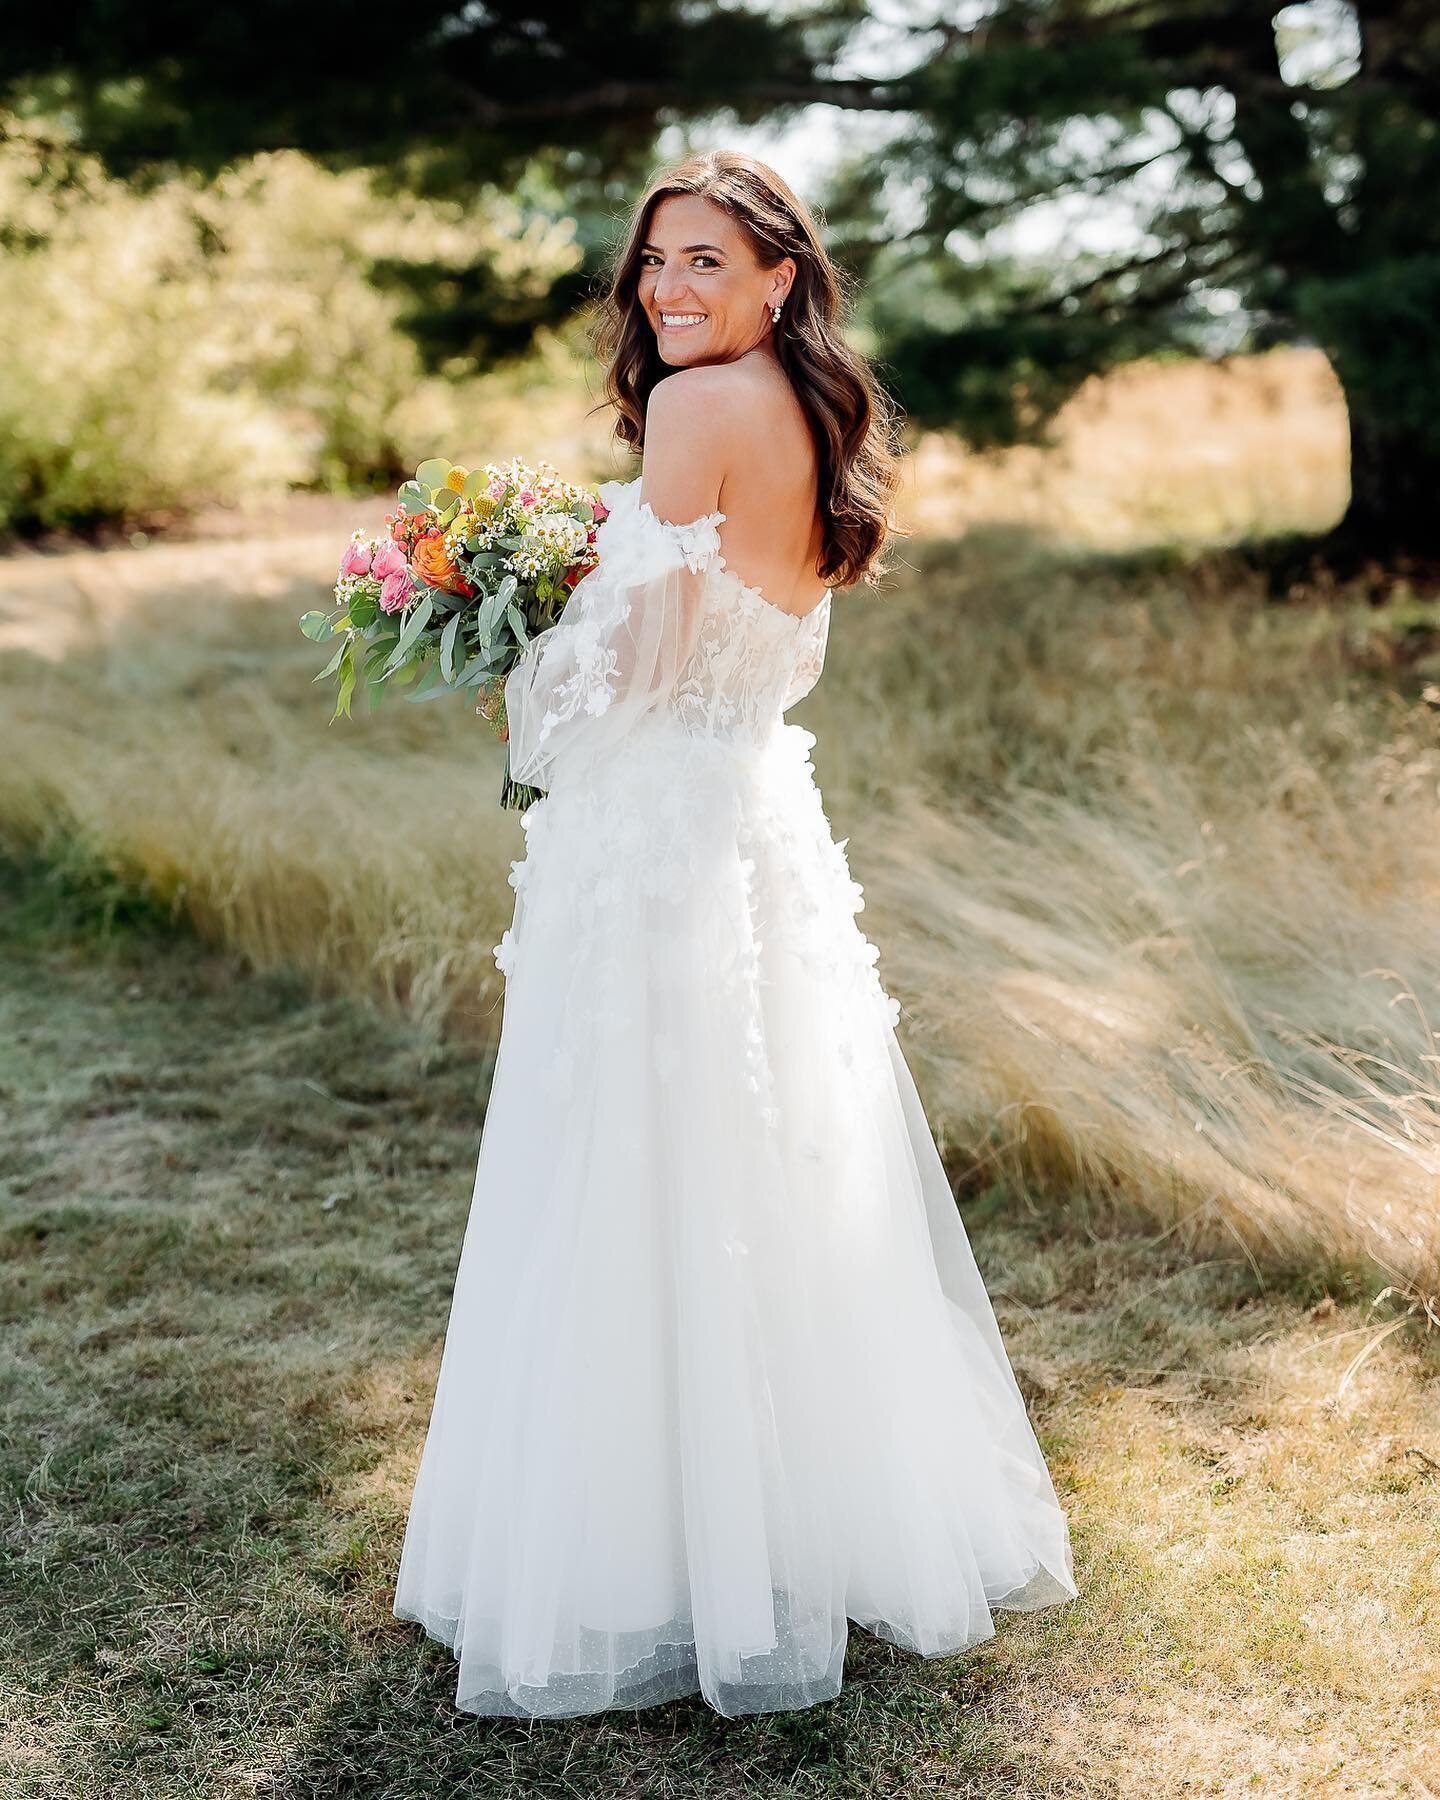 Happy Monday! I have a full week of editing ahead and I&rsquo;m excited to share with you some more beautiful humans, but before I get to work, this dress deserves its own moment! You guys are LOVING it! Meghan was an absolute stunner in this #demetr